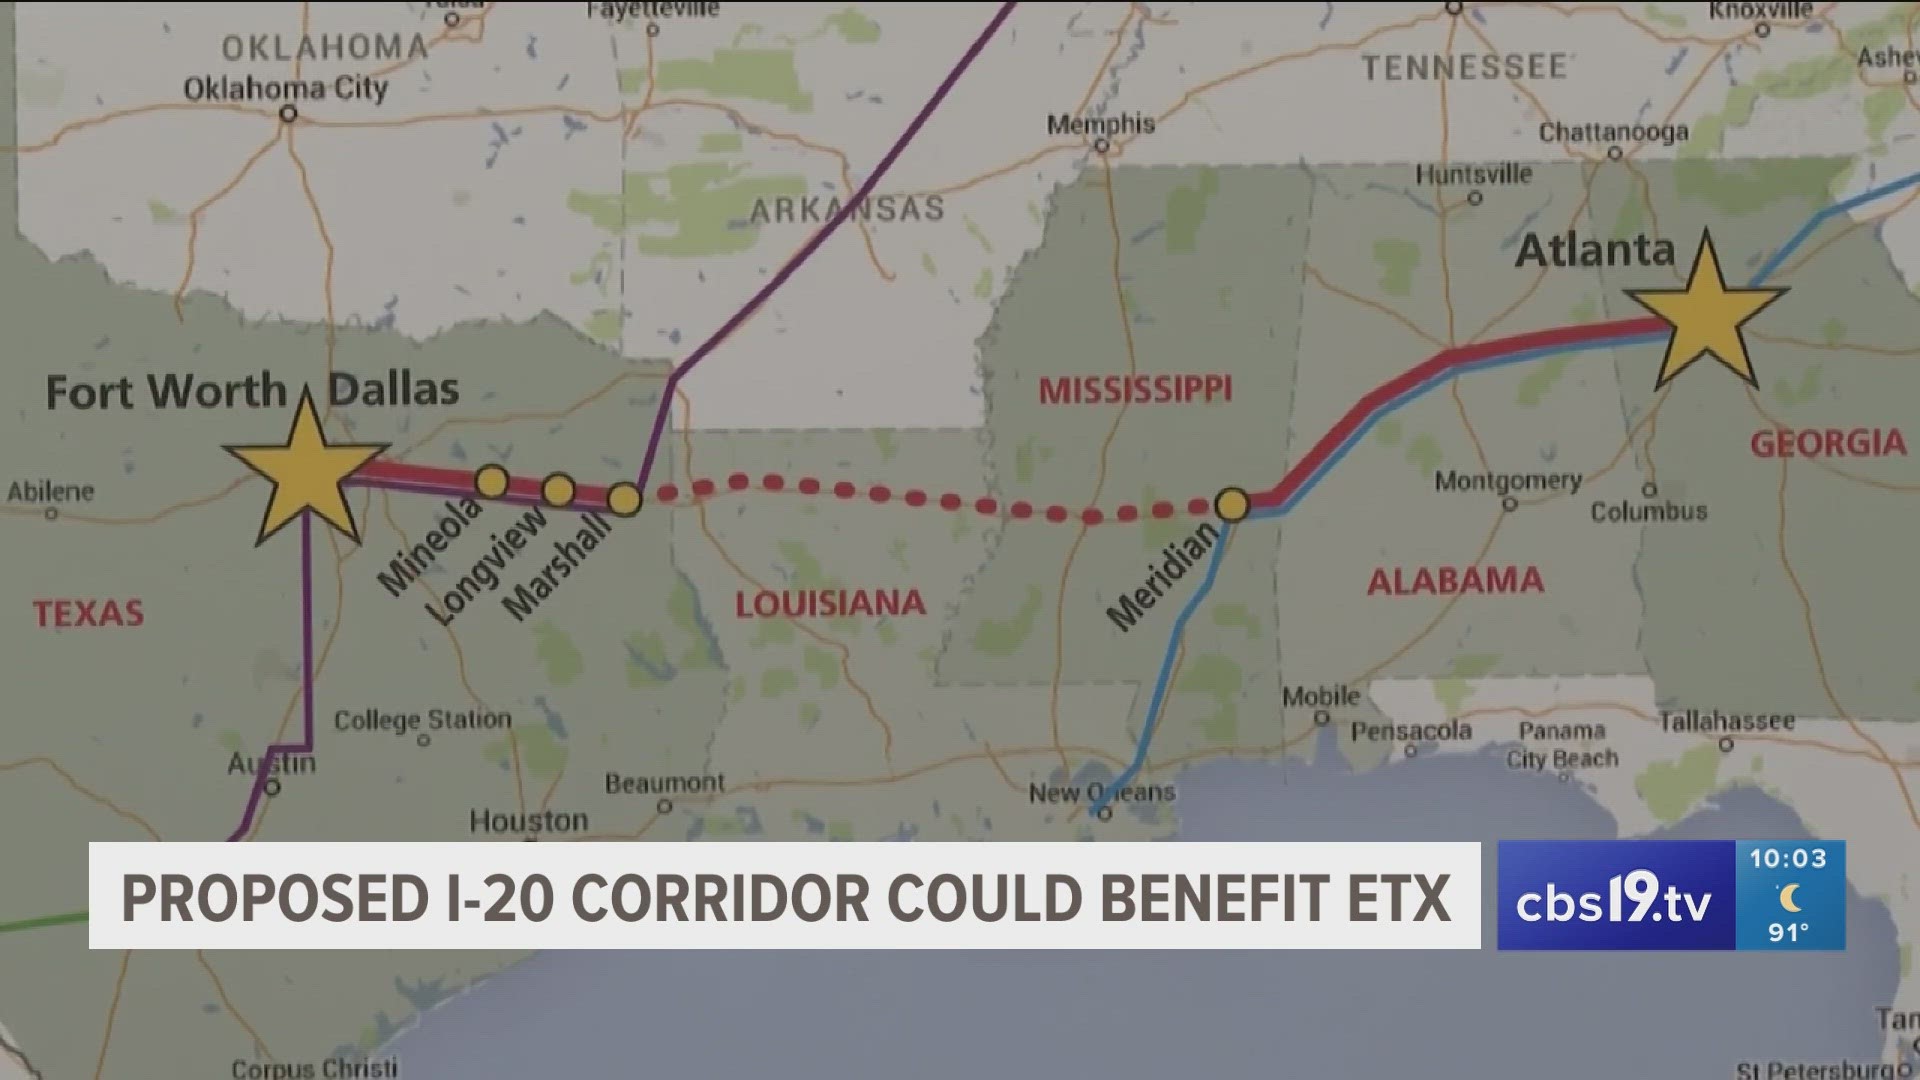 The proposal aims to connect passenger railways from Fort Worth all the way to Atlanta. Investors hope to get federal infrastructure funding to help get started.